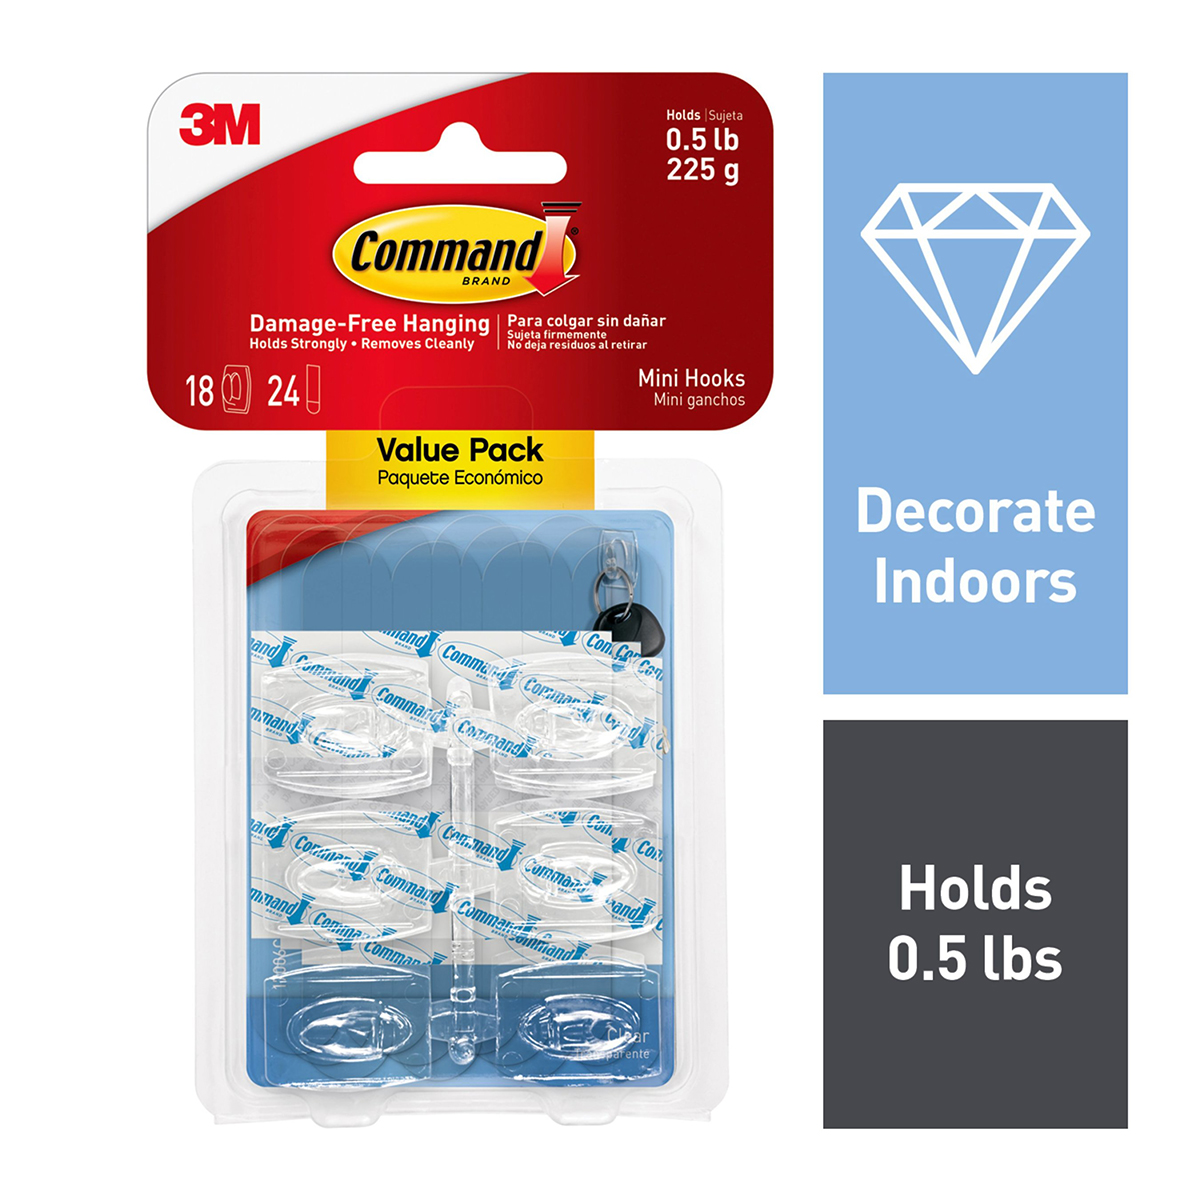 3M Command Adhesive Mini Hooks | The Container Store